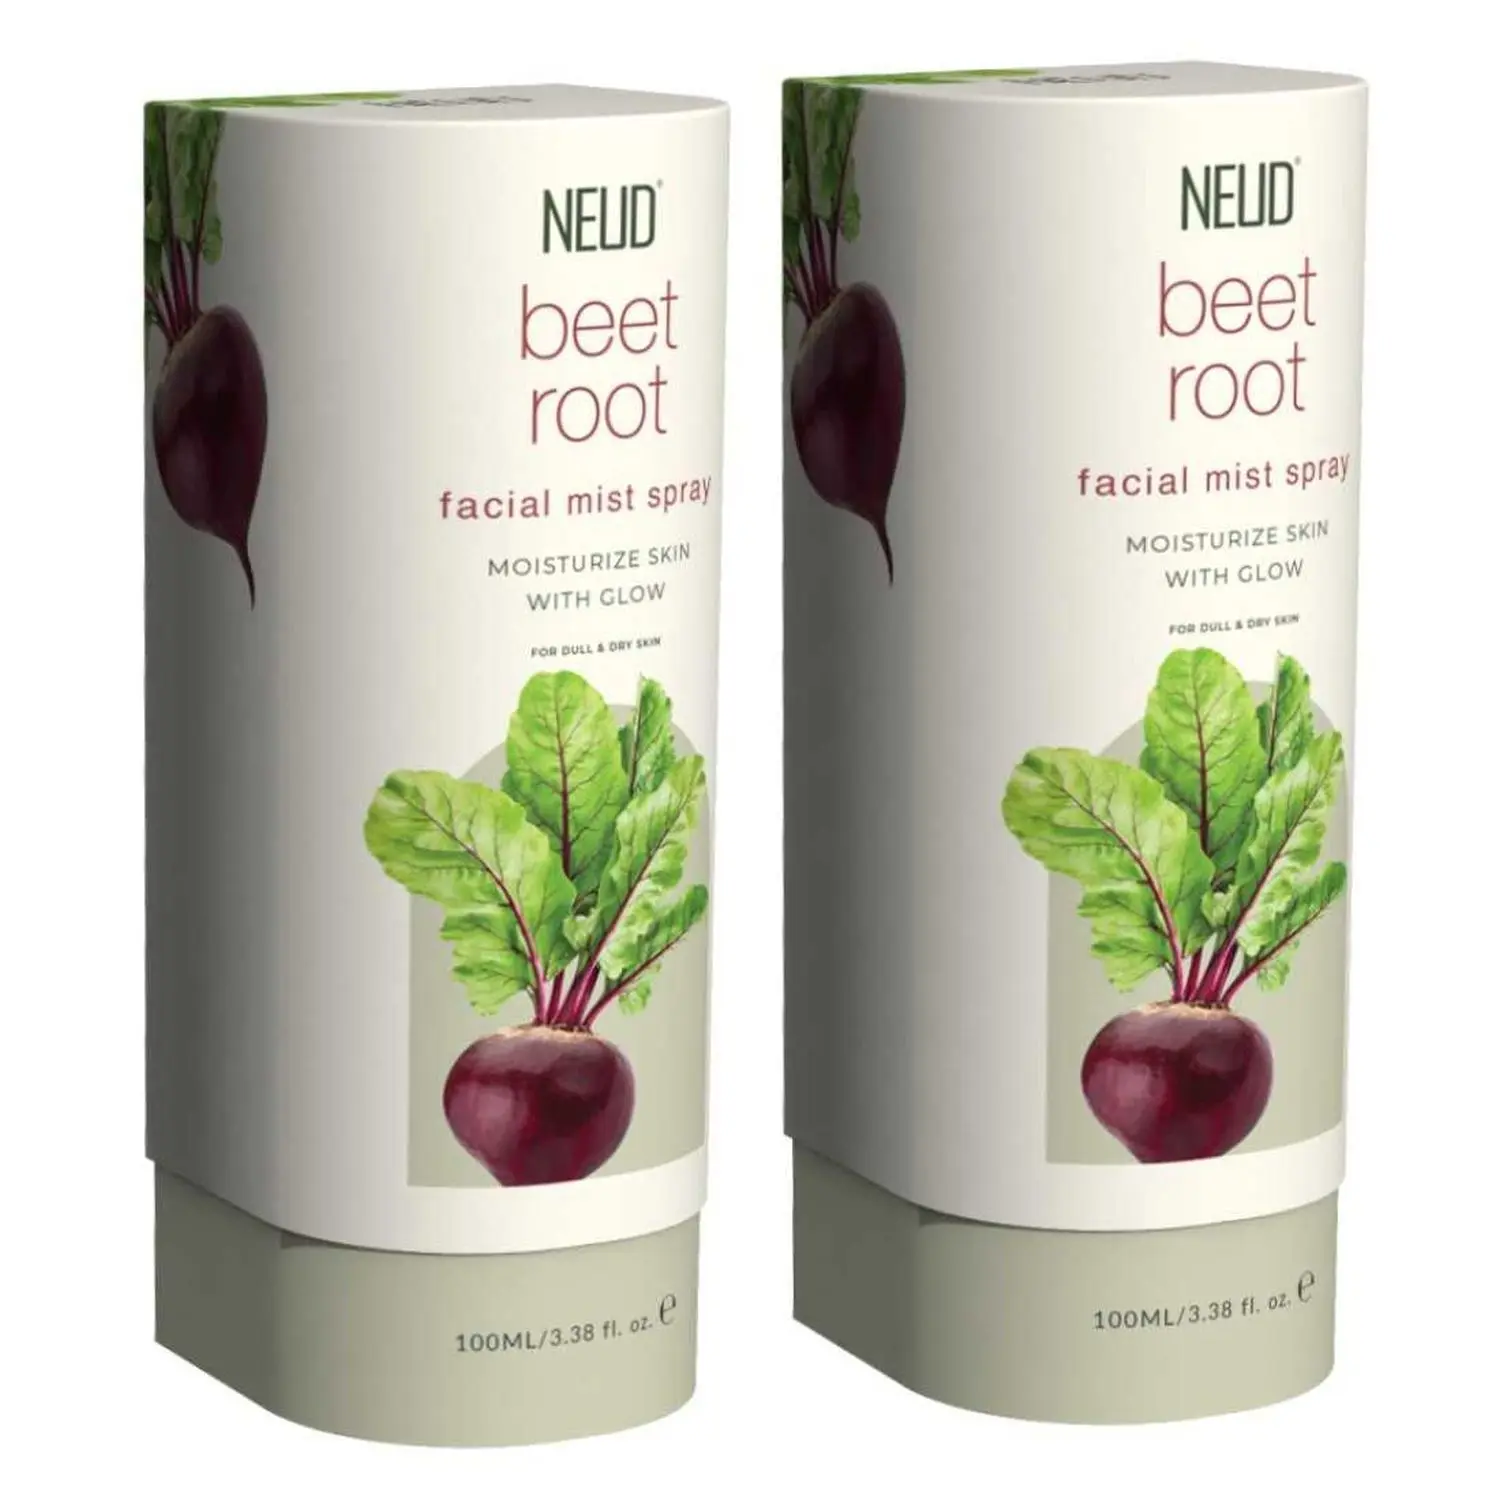 NEUD Beet Root Facial Mist Spray for Glowing and Moisturized Skin - 2 Packs (100 ml Each)